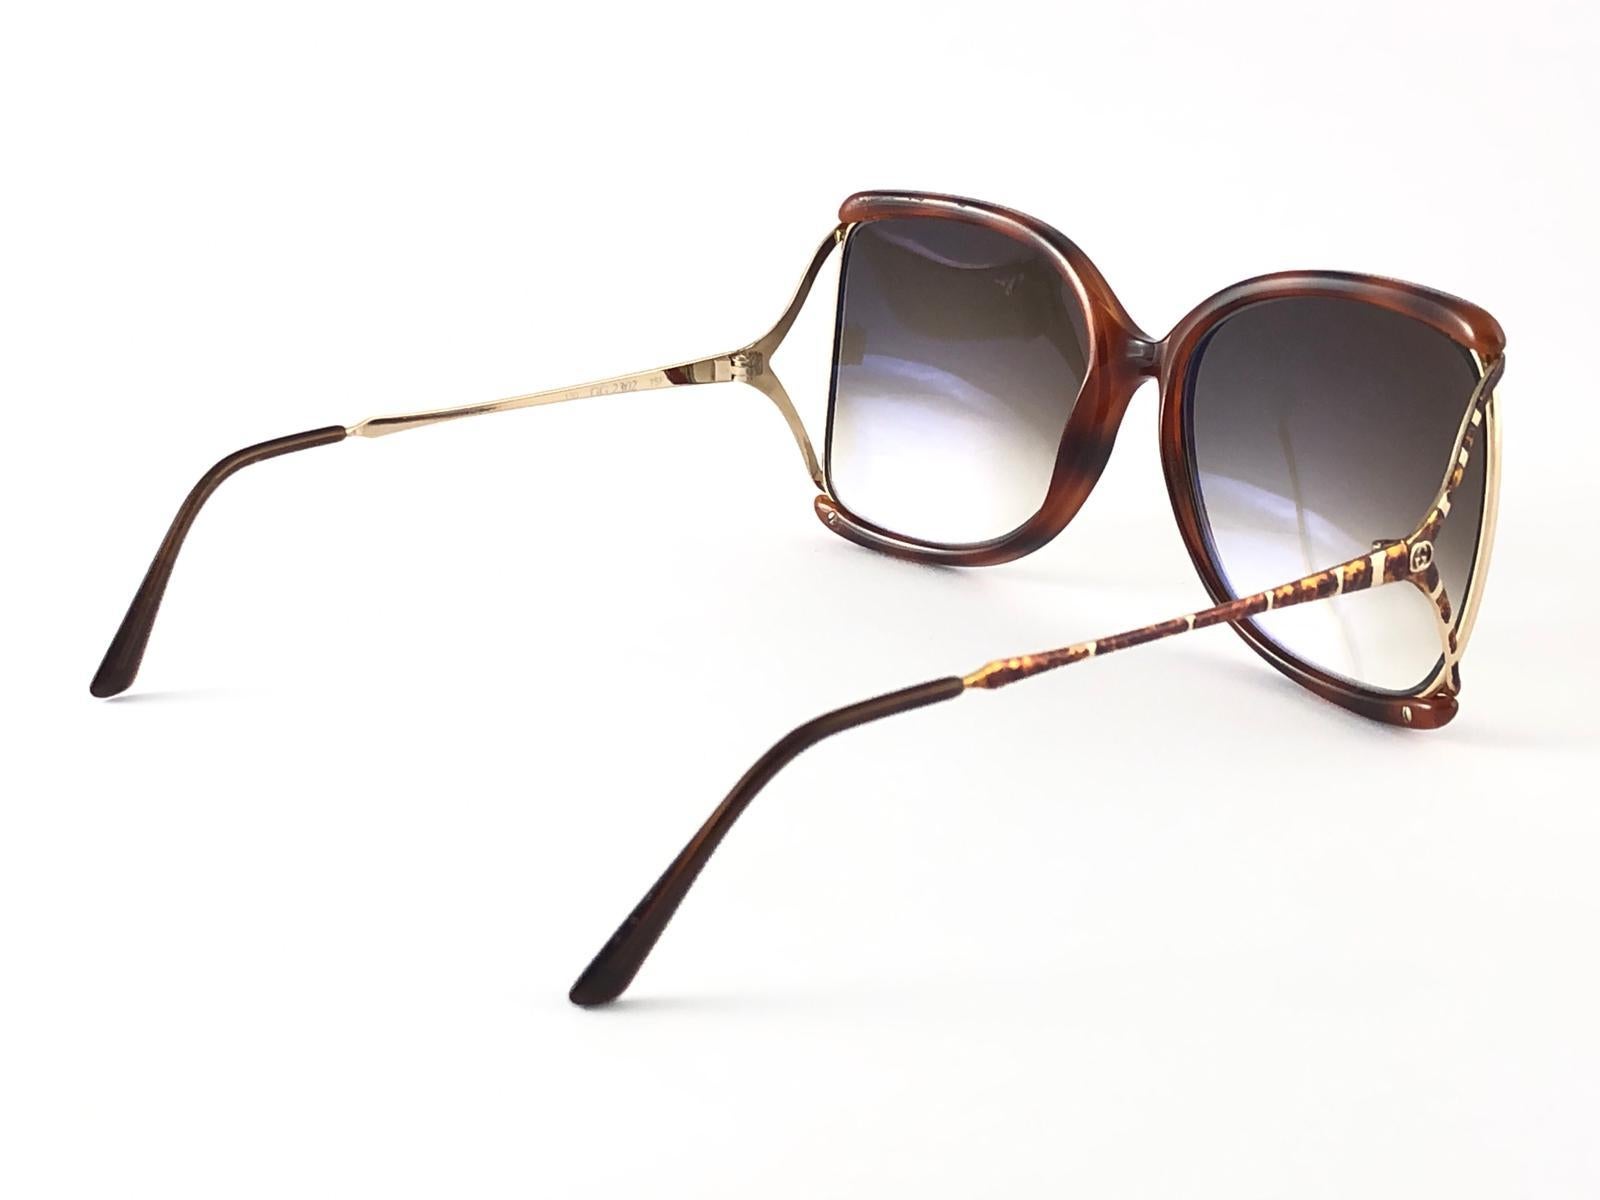 New Vintage Gucci 2302 Tortoise & Gold Accents Sunglasses 1980's Made in Italy 3